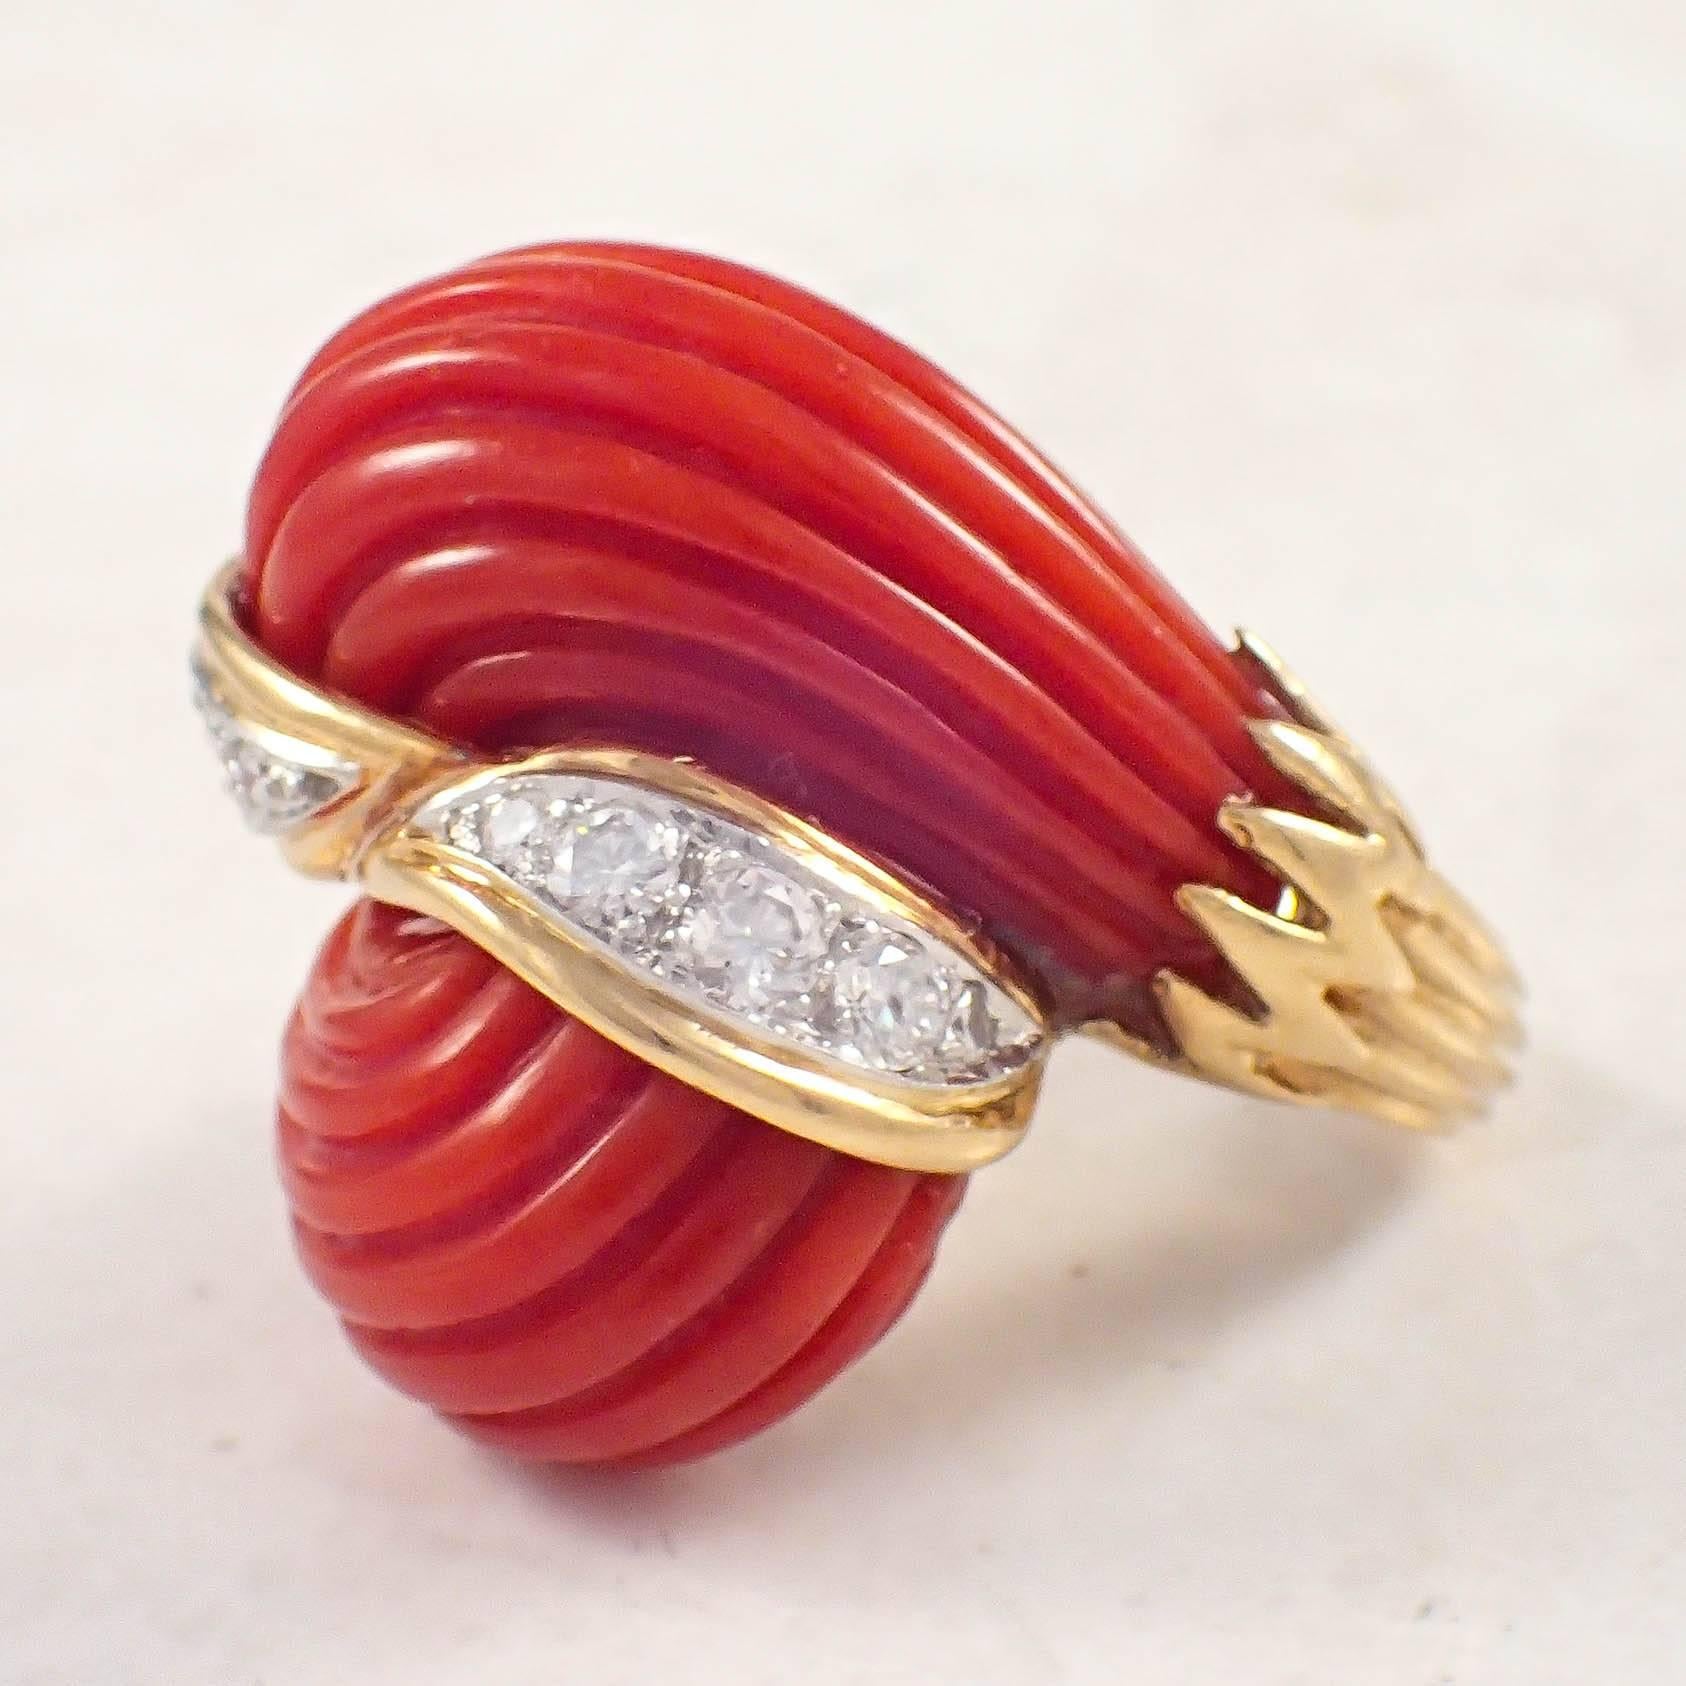 18K Yellow gold coral and diamond dome ring. The bypass dome ring is set with 2 carved oxblood coral pieces, and is set with 10 round diamonds weighing approximately .65 carat total. Gold weight 17.8 grams. 
Circa 1960s

Color: G-H
Clarity: VS-SI